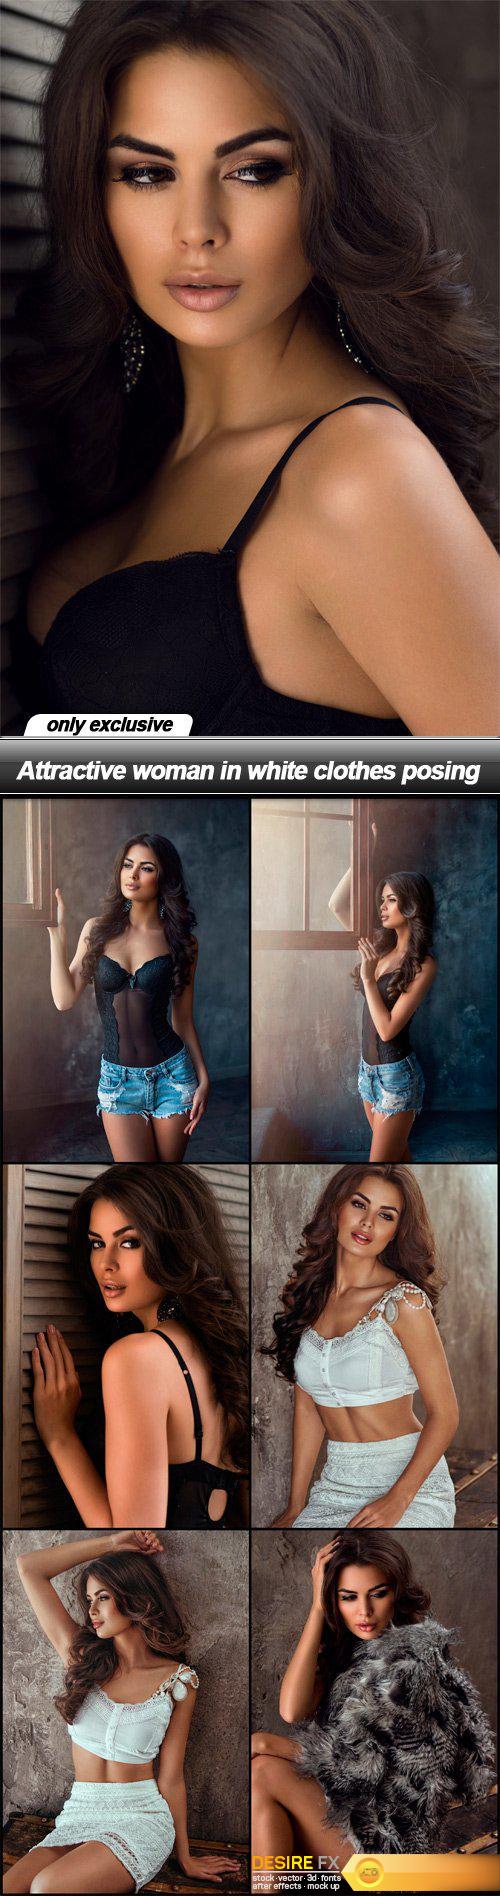 Attractive woman in white clothes posing - 7 UHQ JPEG